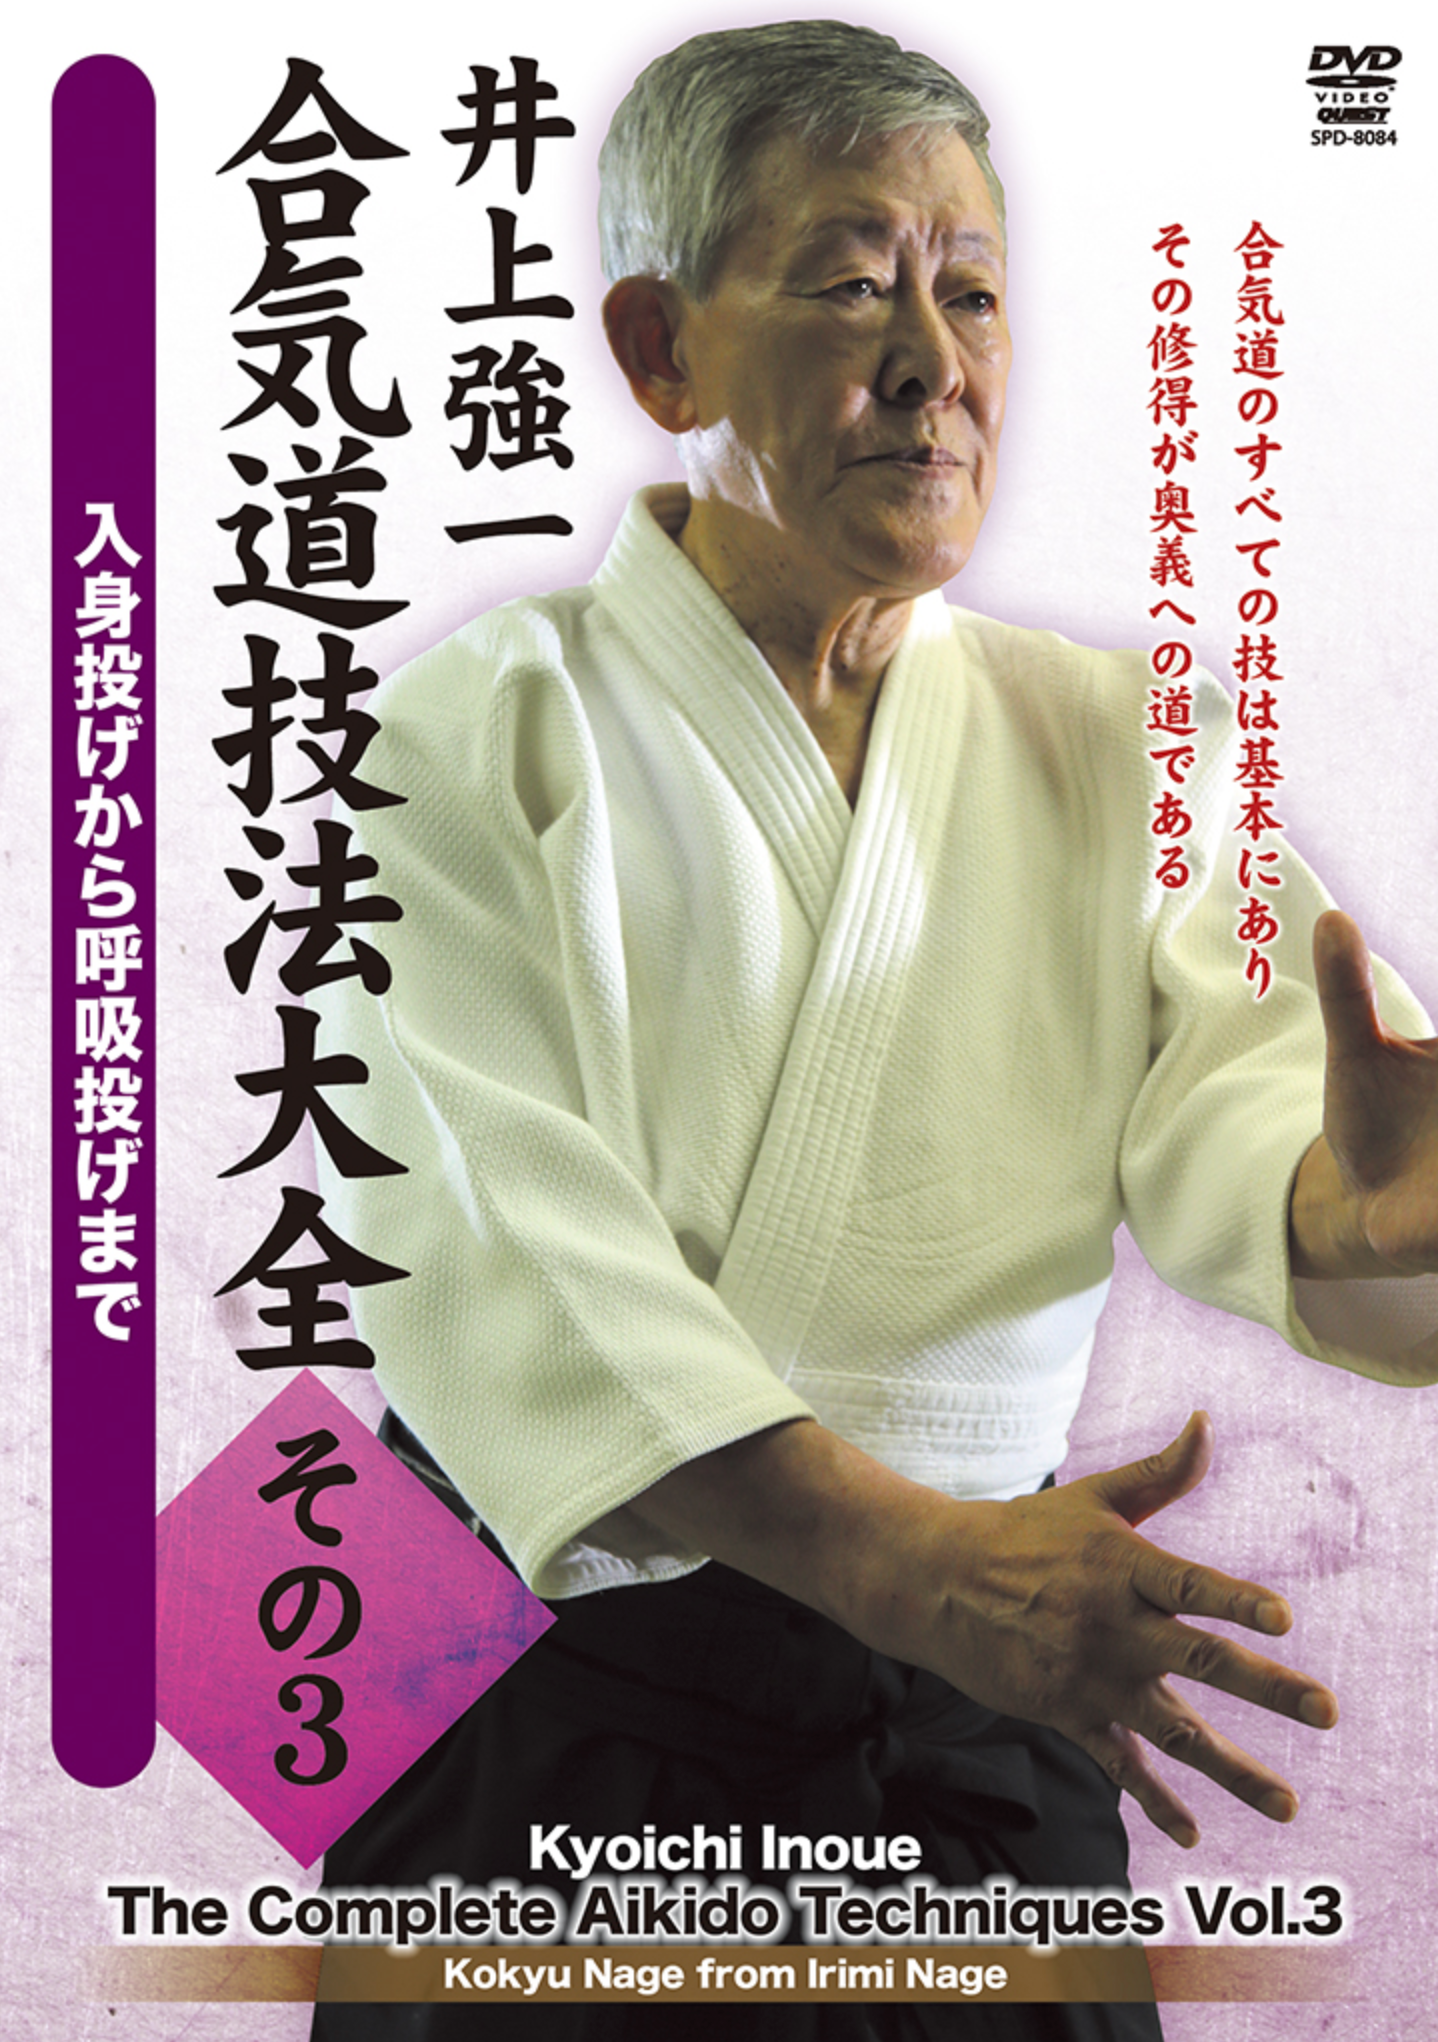 Aikido Complete Techniques DVD 3 by Kyoichi Inoue - Budovideos Inc